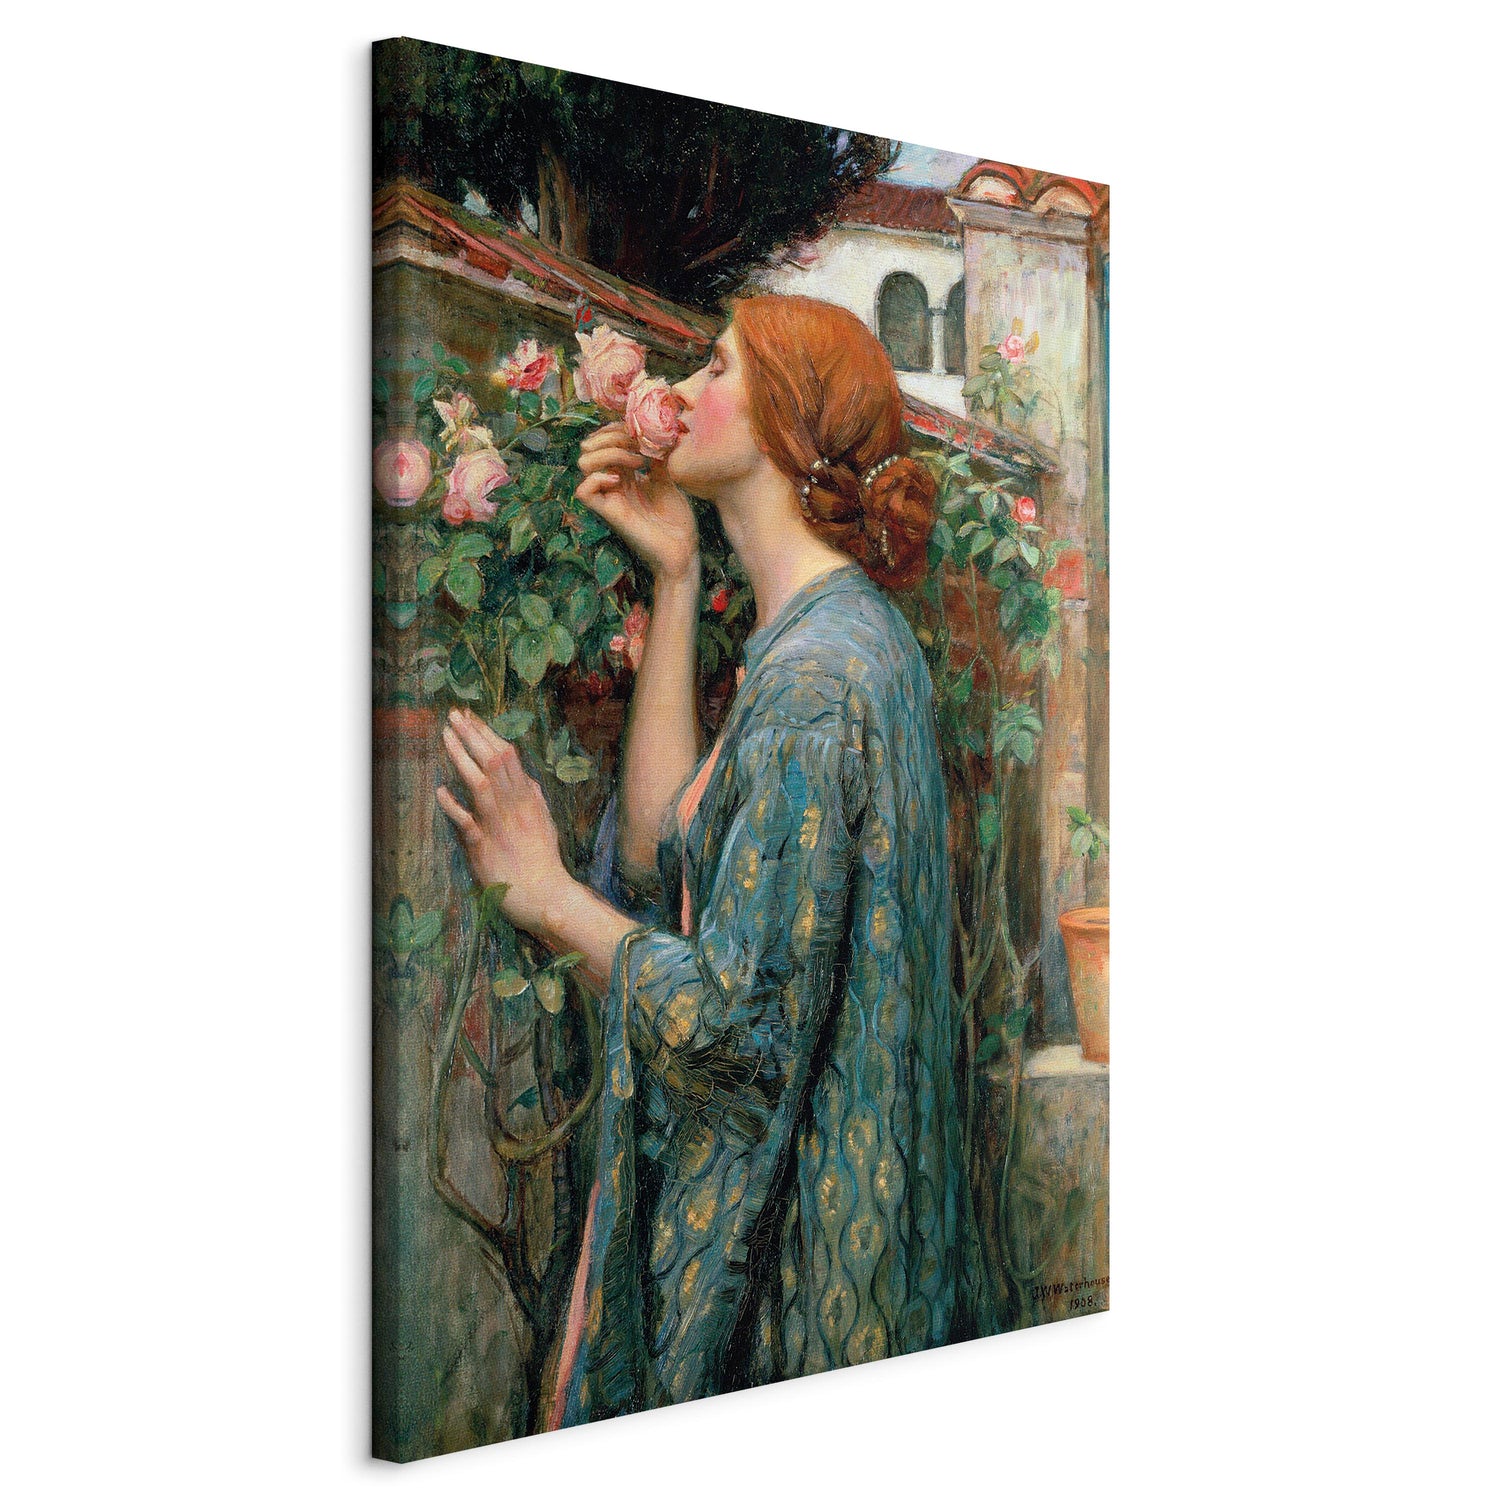 Reproduction Canvas Wall Art - The Soul of the Rose